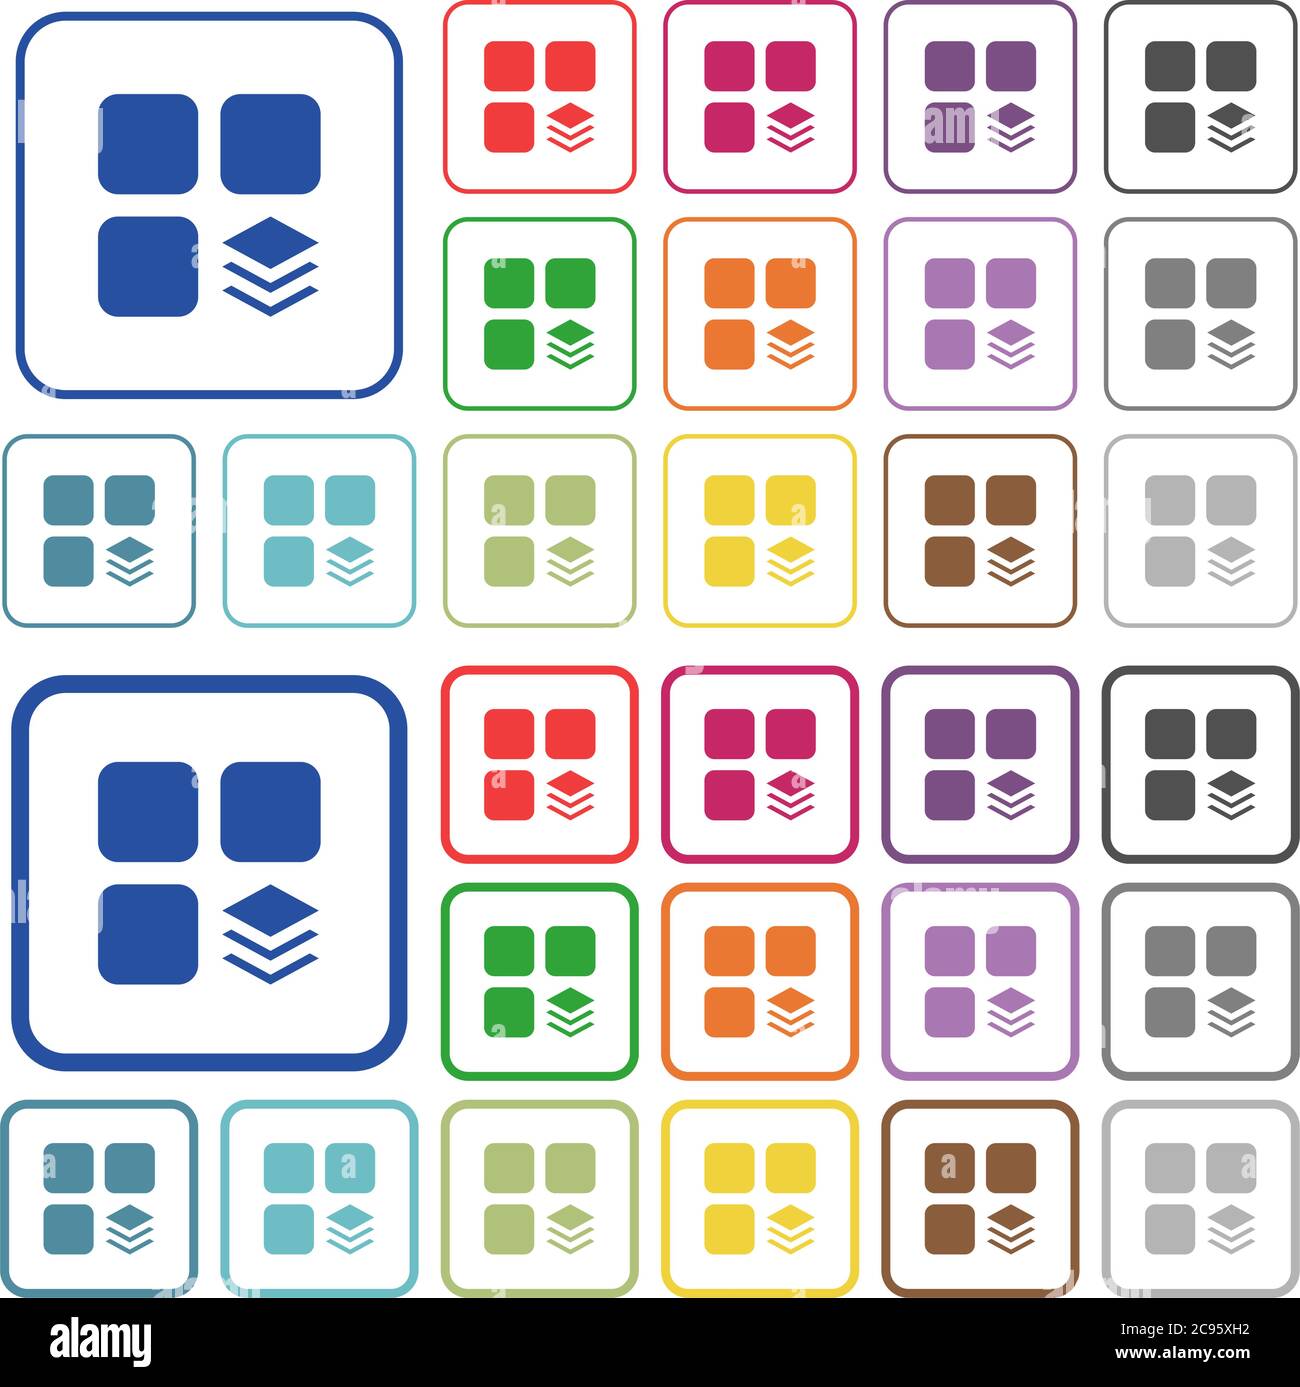 Multiple components color flat icons in rounded square frames. Thin and thick versions included. Stock Vector